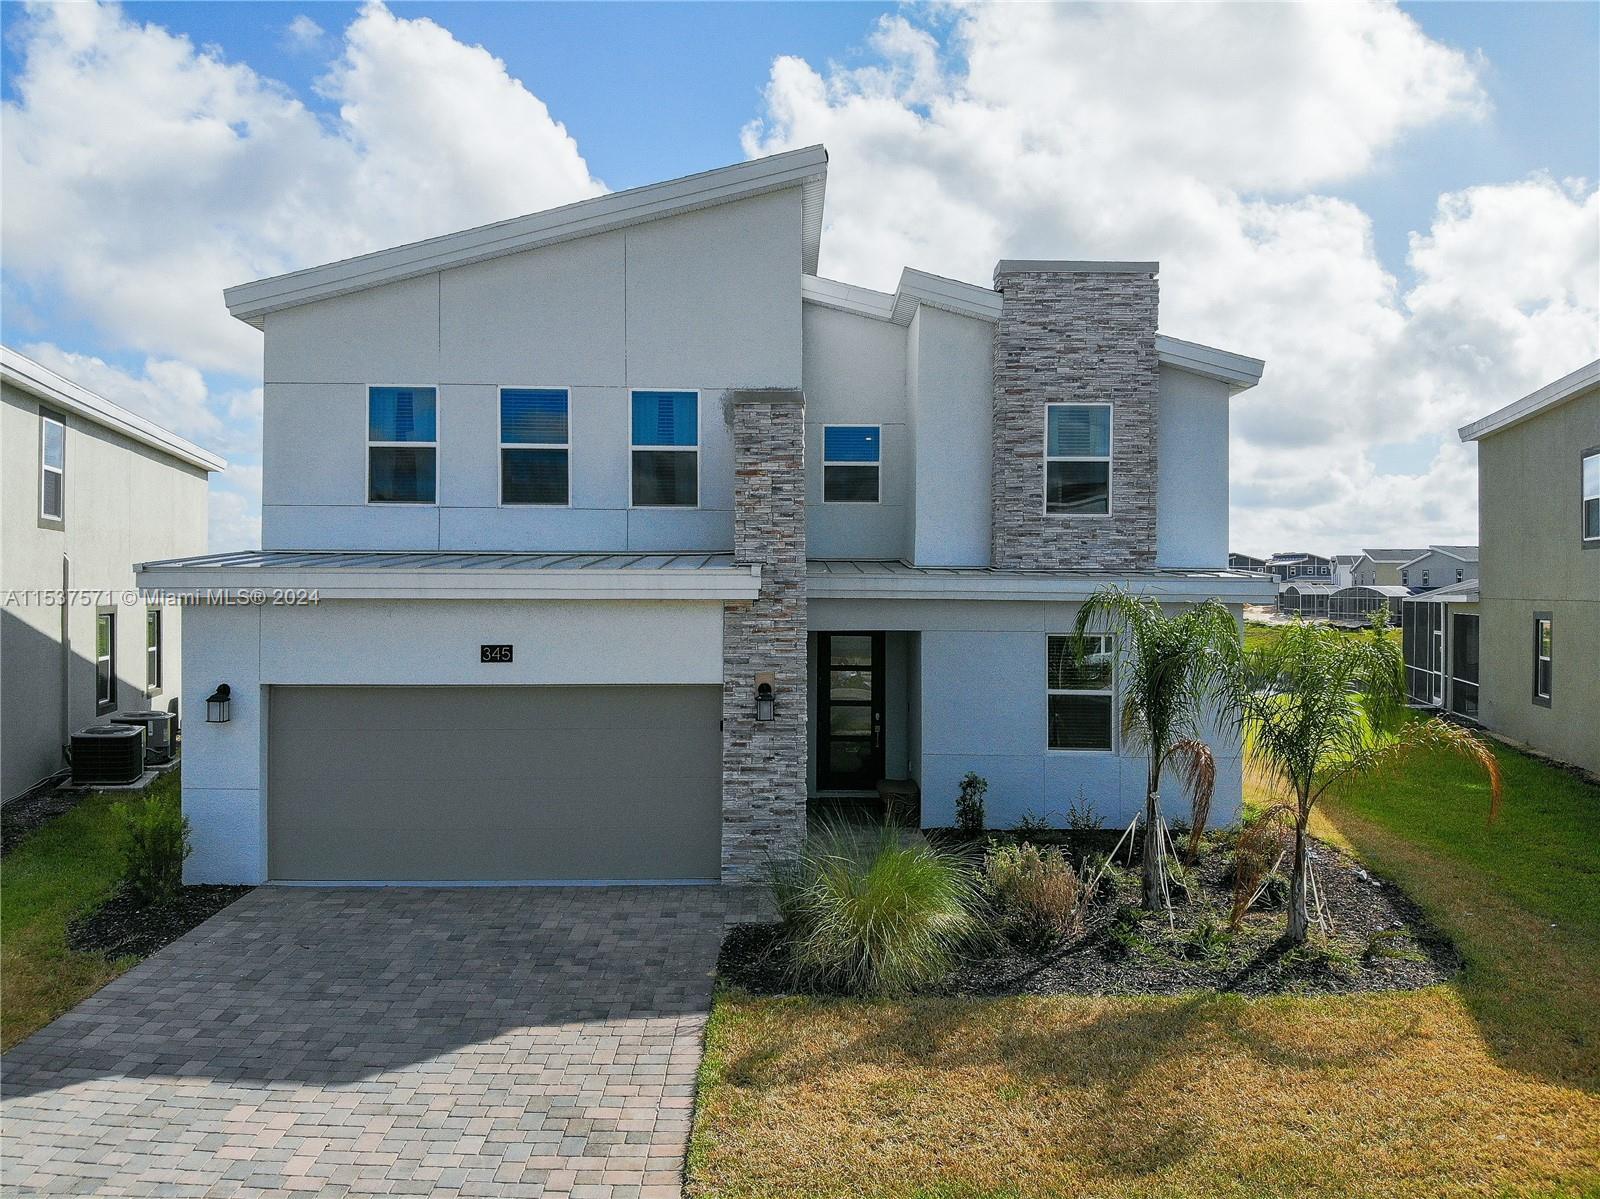 345 Ocean Course Ave, Kissimmee,  - 6 Bedrooms  
7 Bathrooms - 